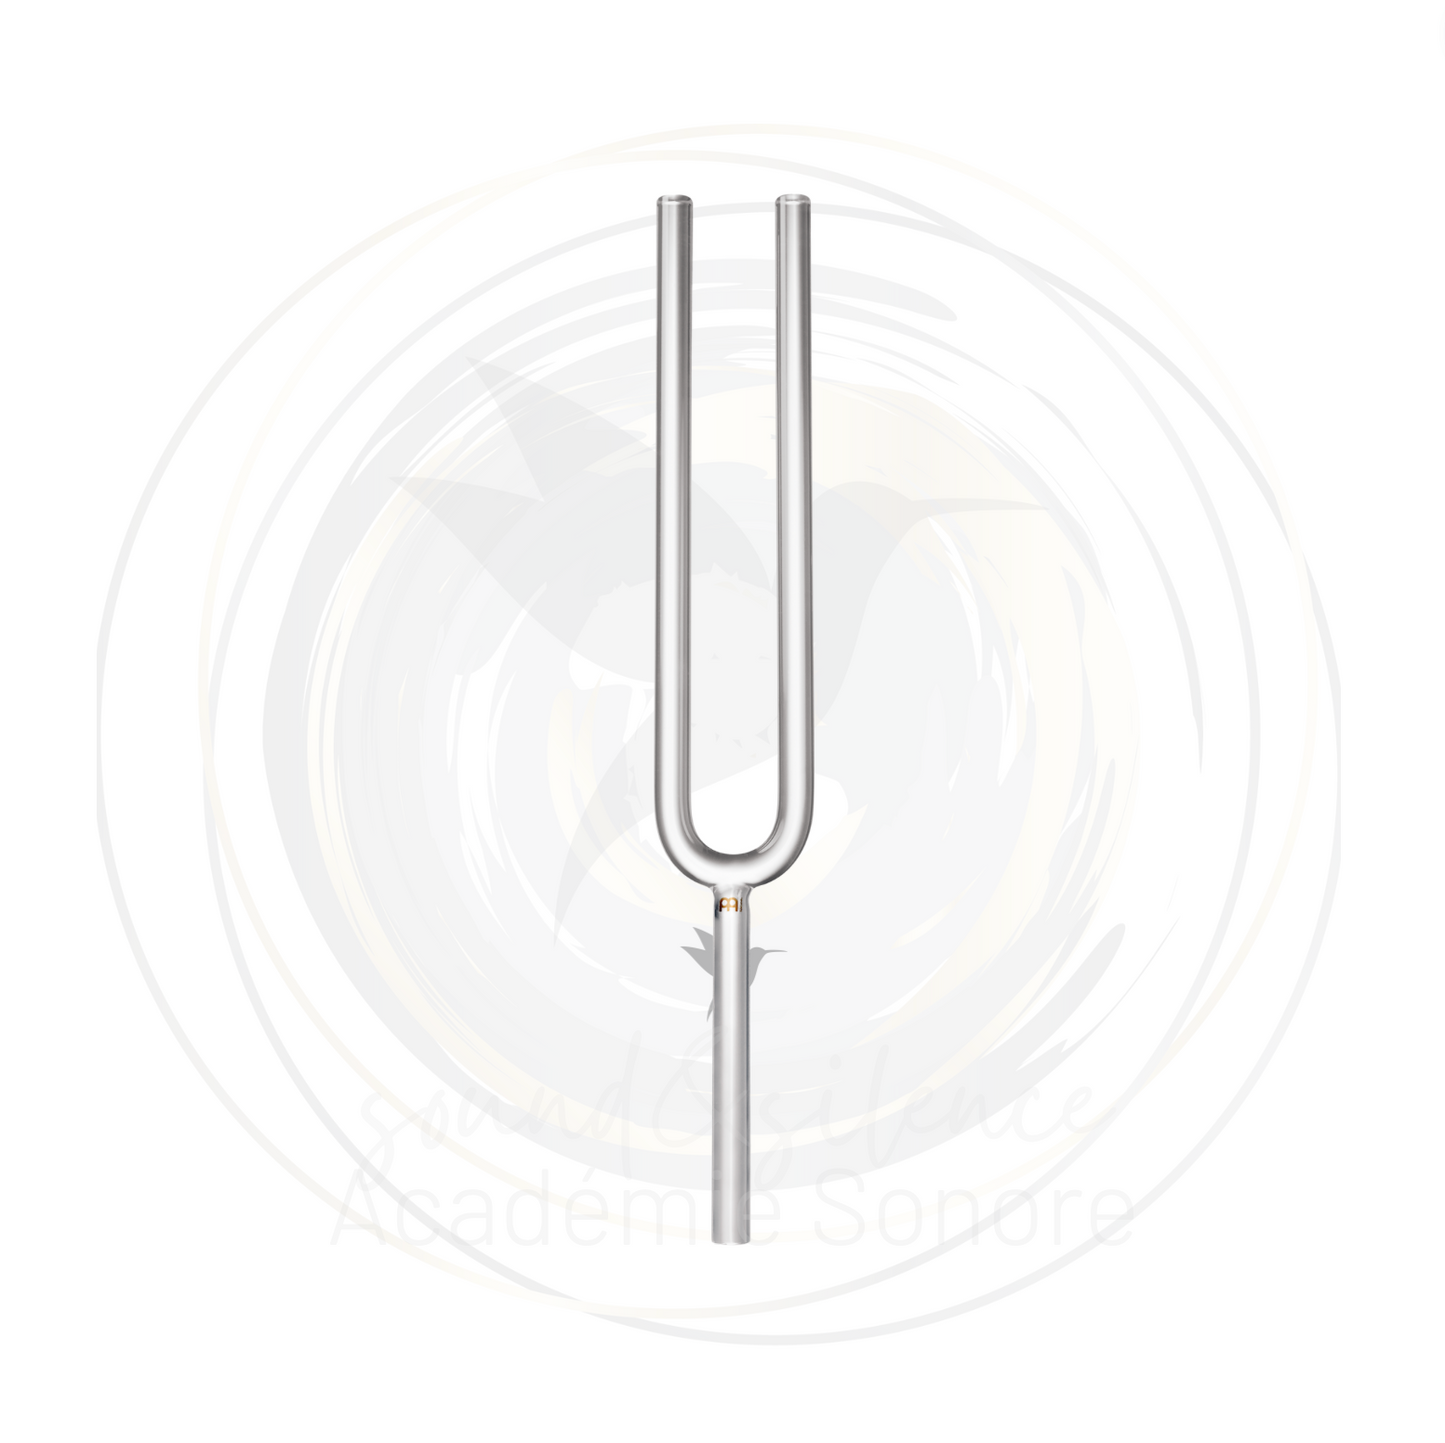 Crystal tuning fork NOTE C - 16 MM